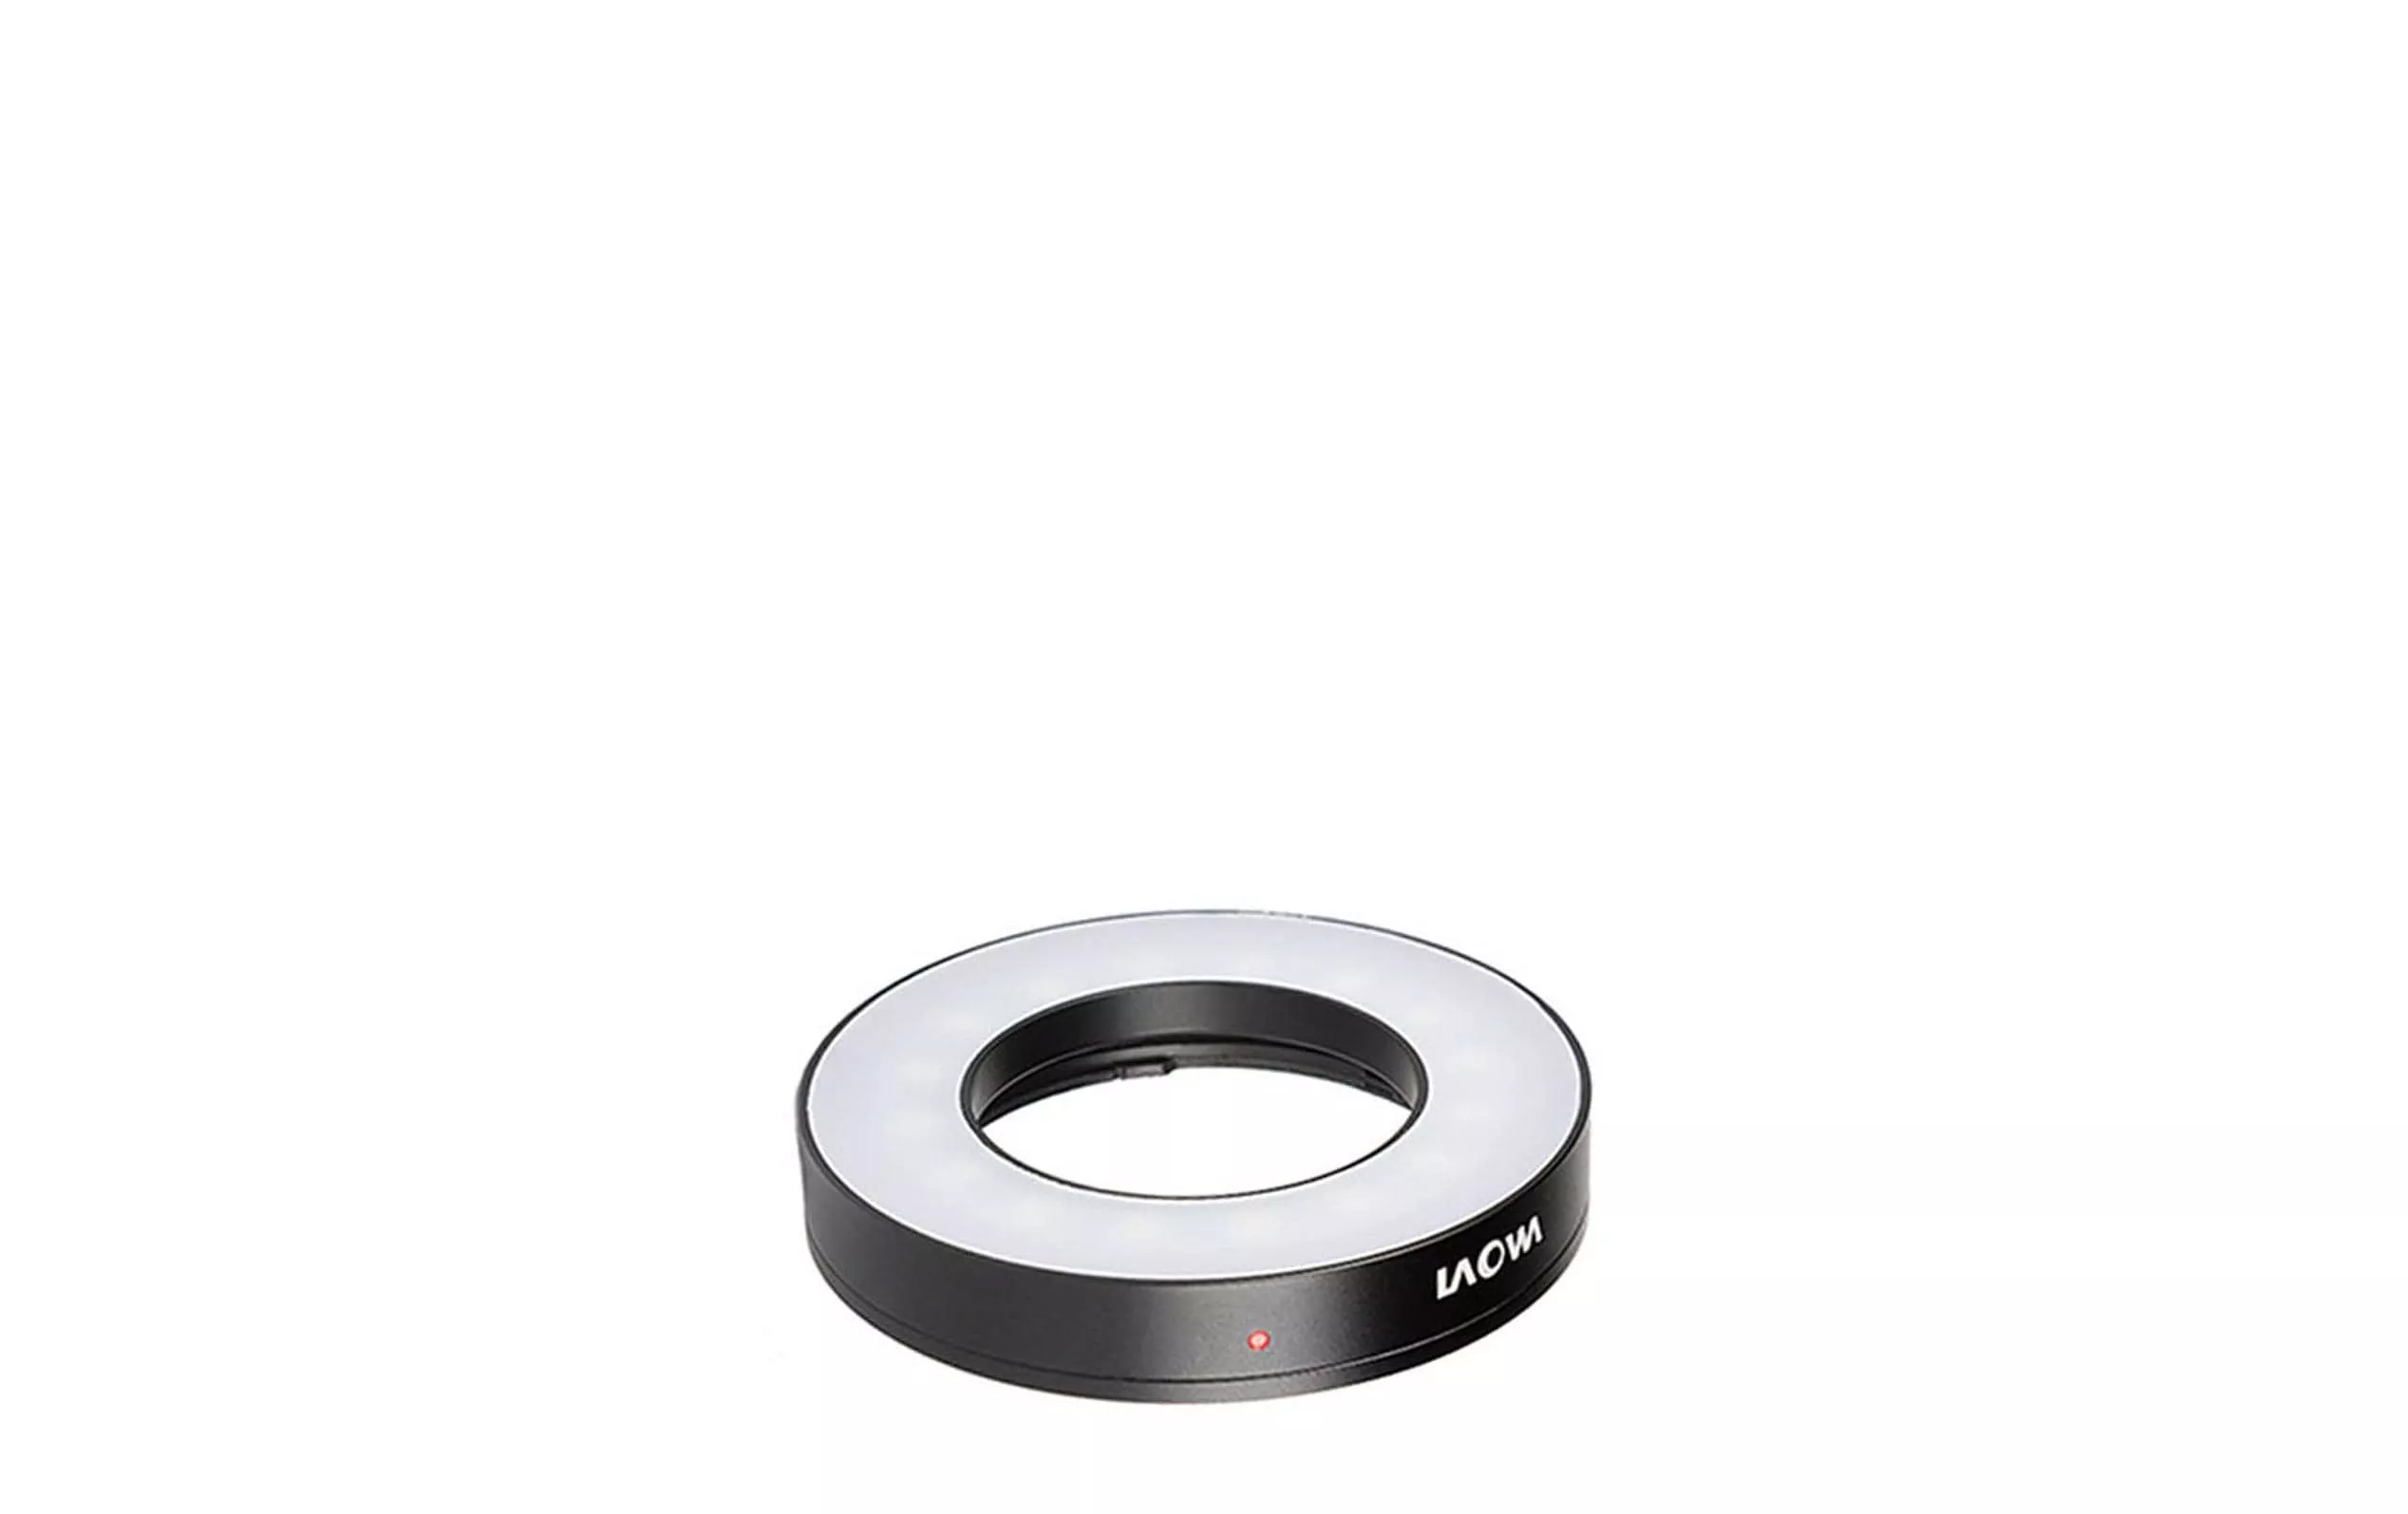 Eclairage annulaire LED pour objectif 25 mm F2.8